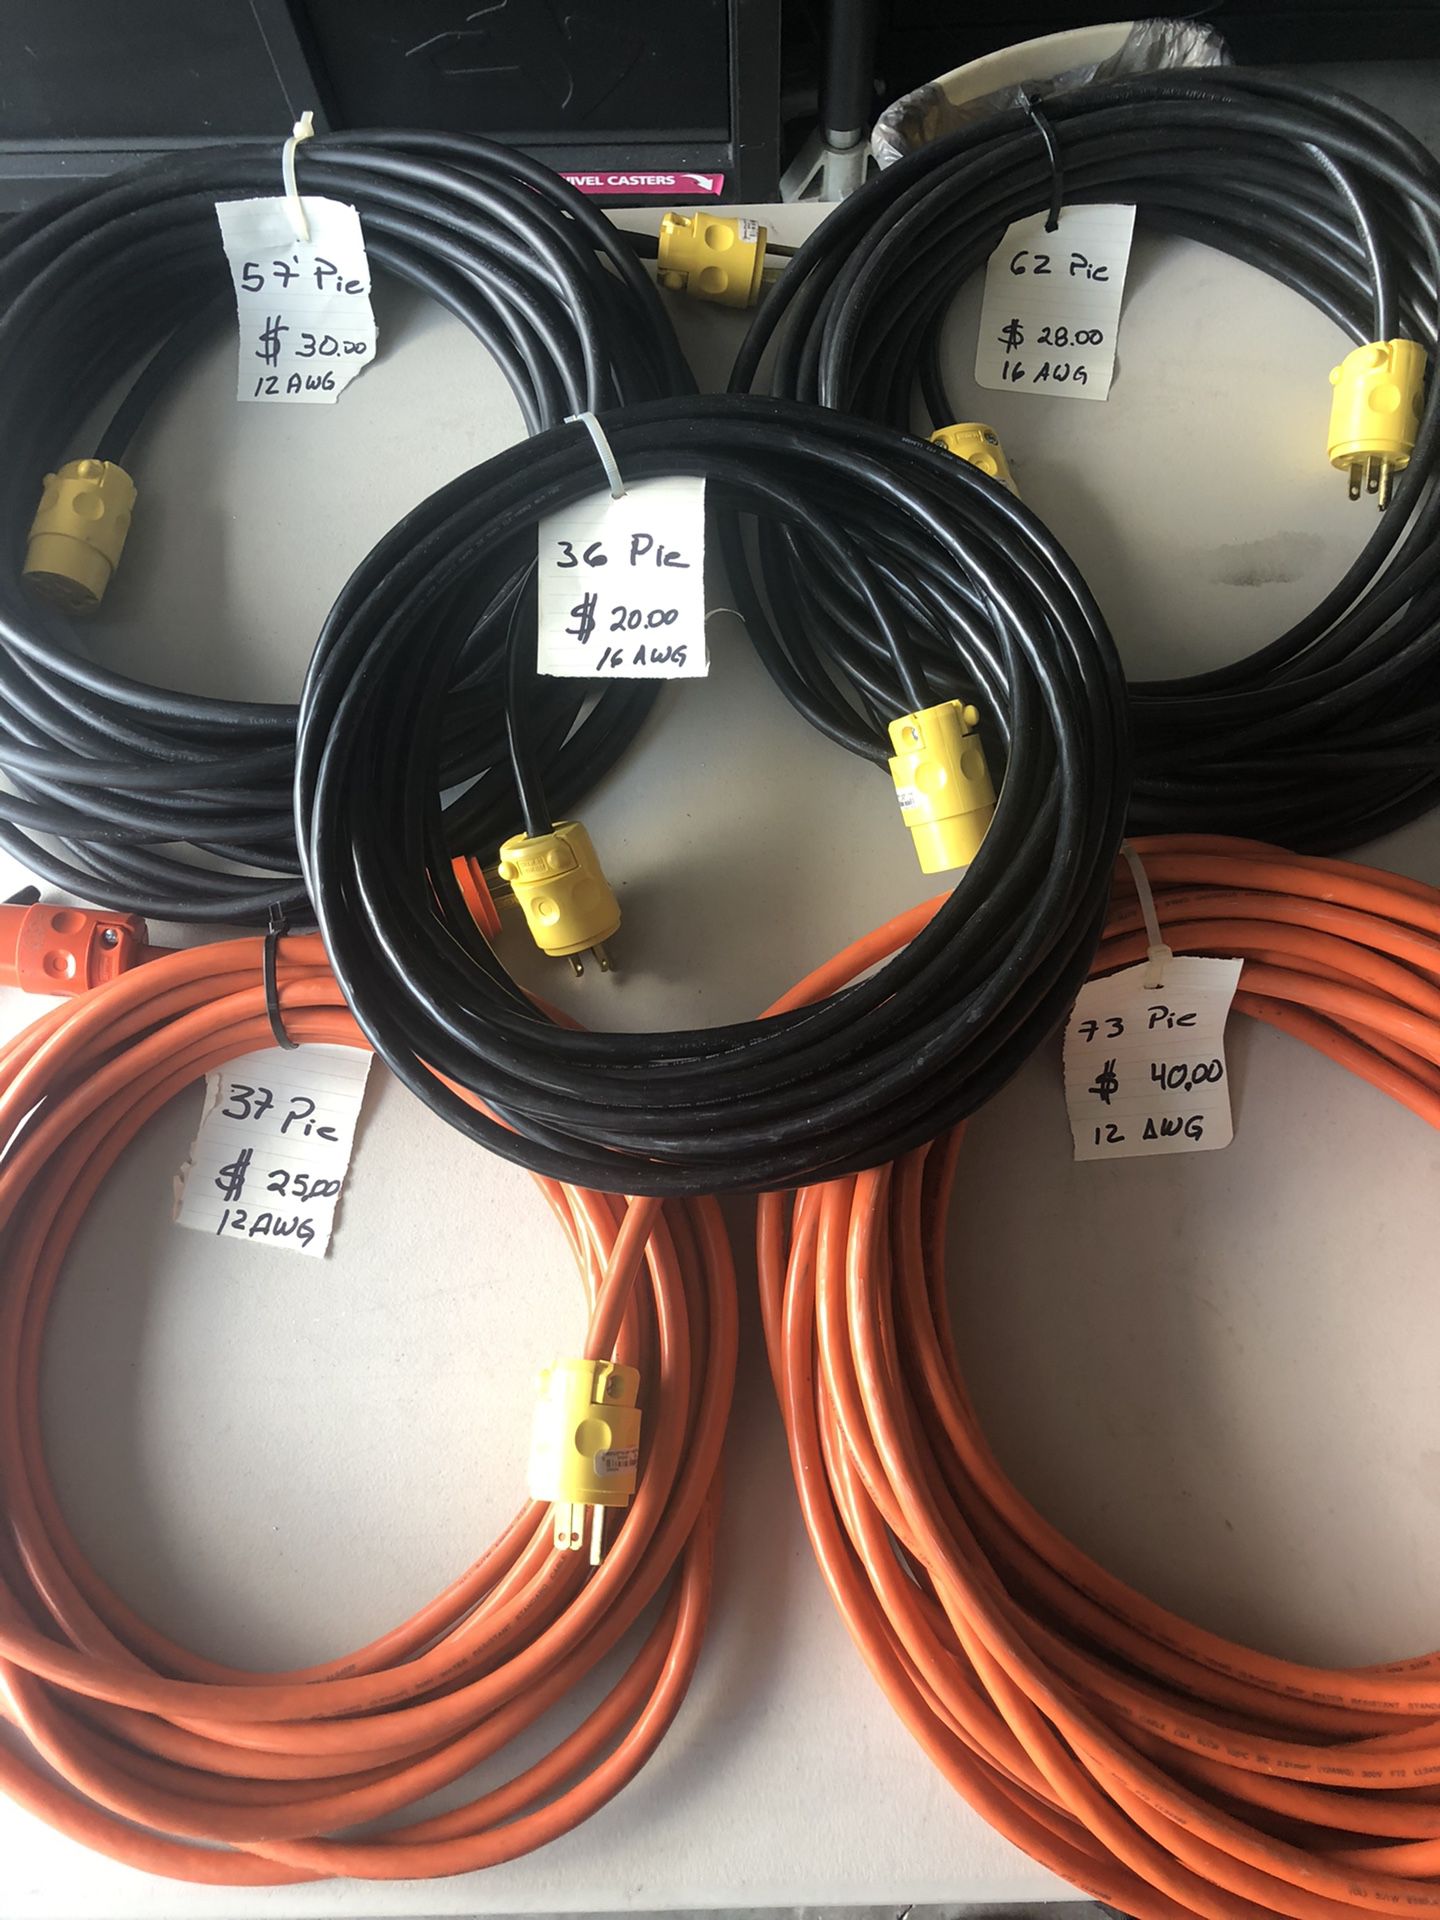 New extension cords (brand new)